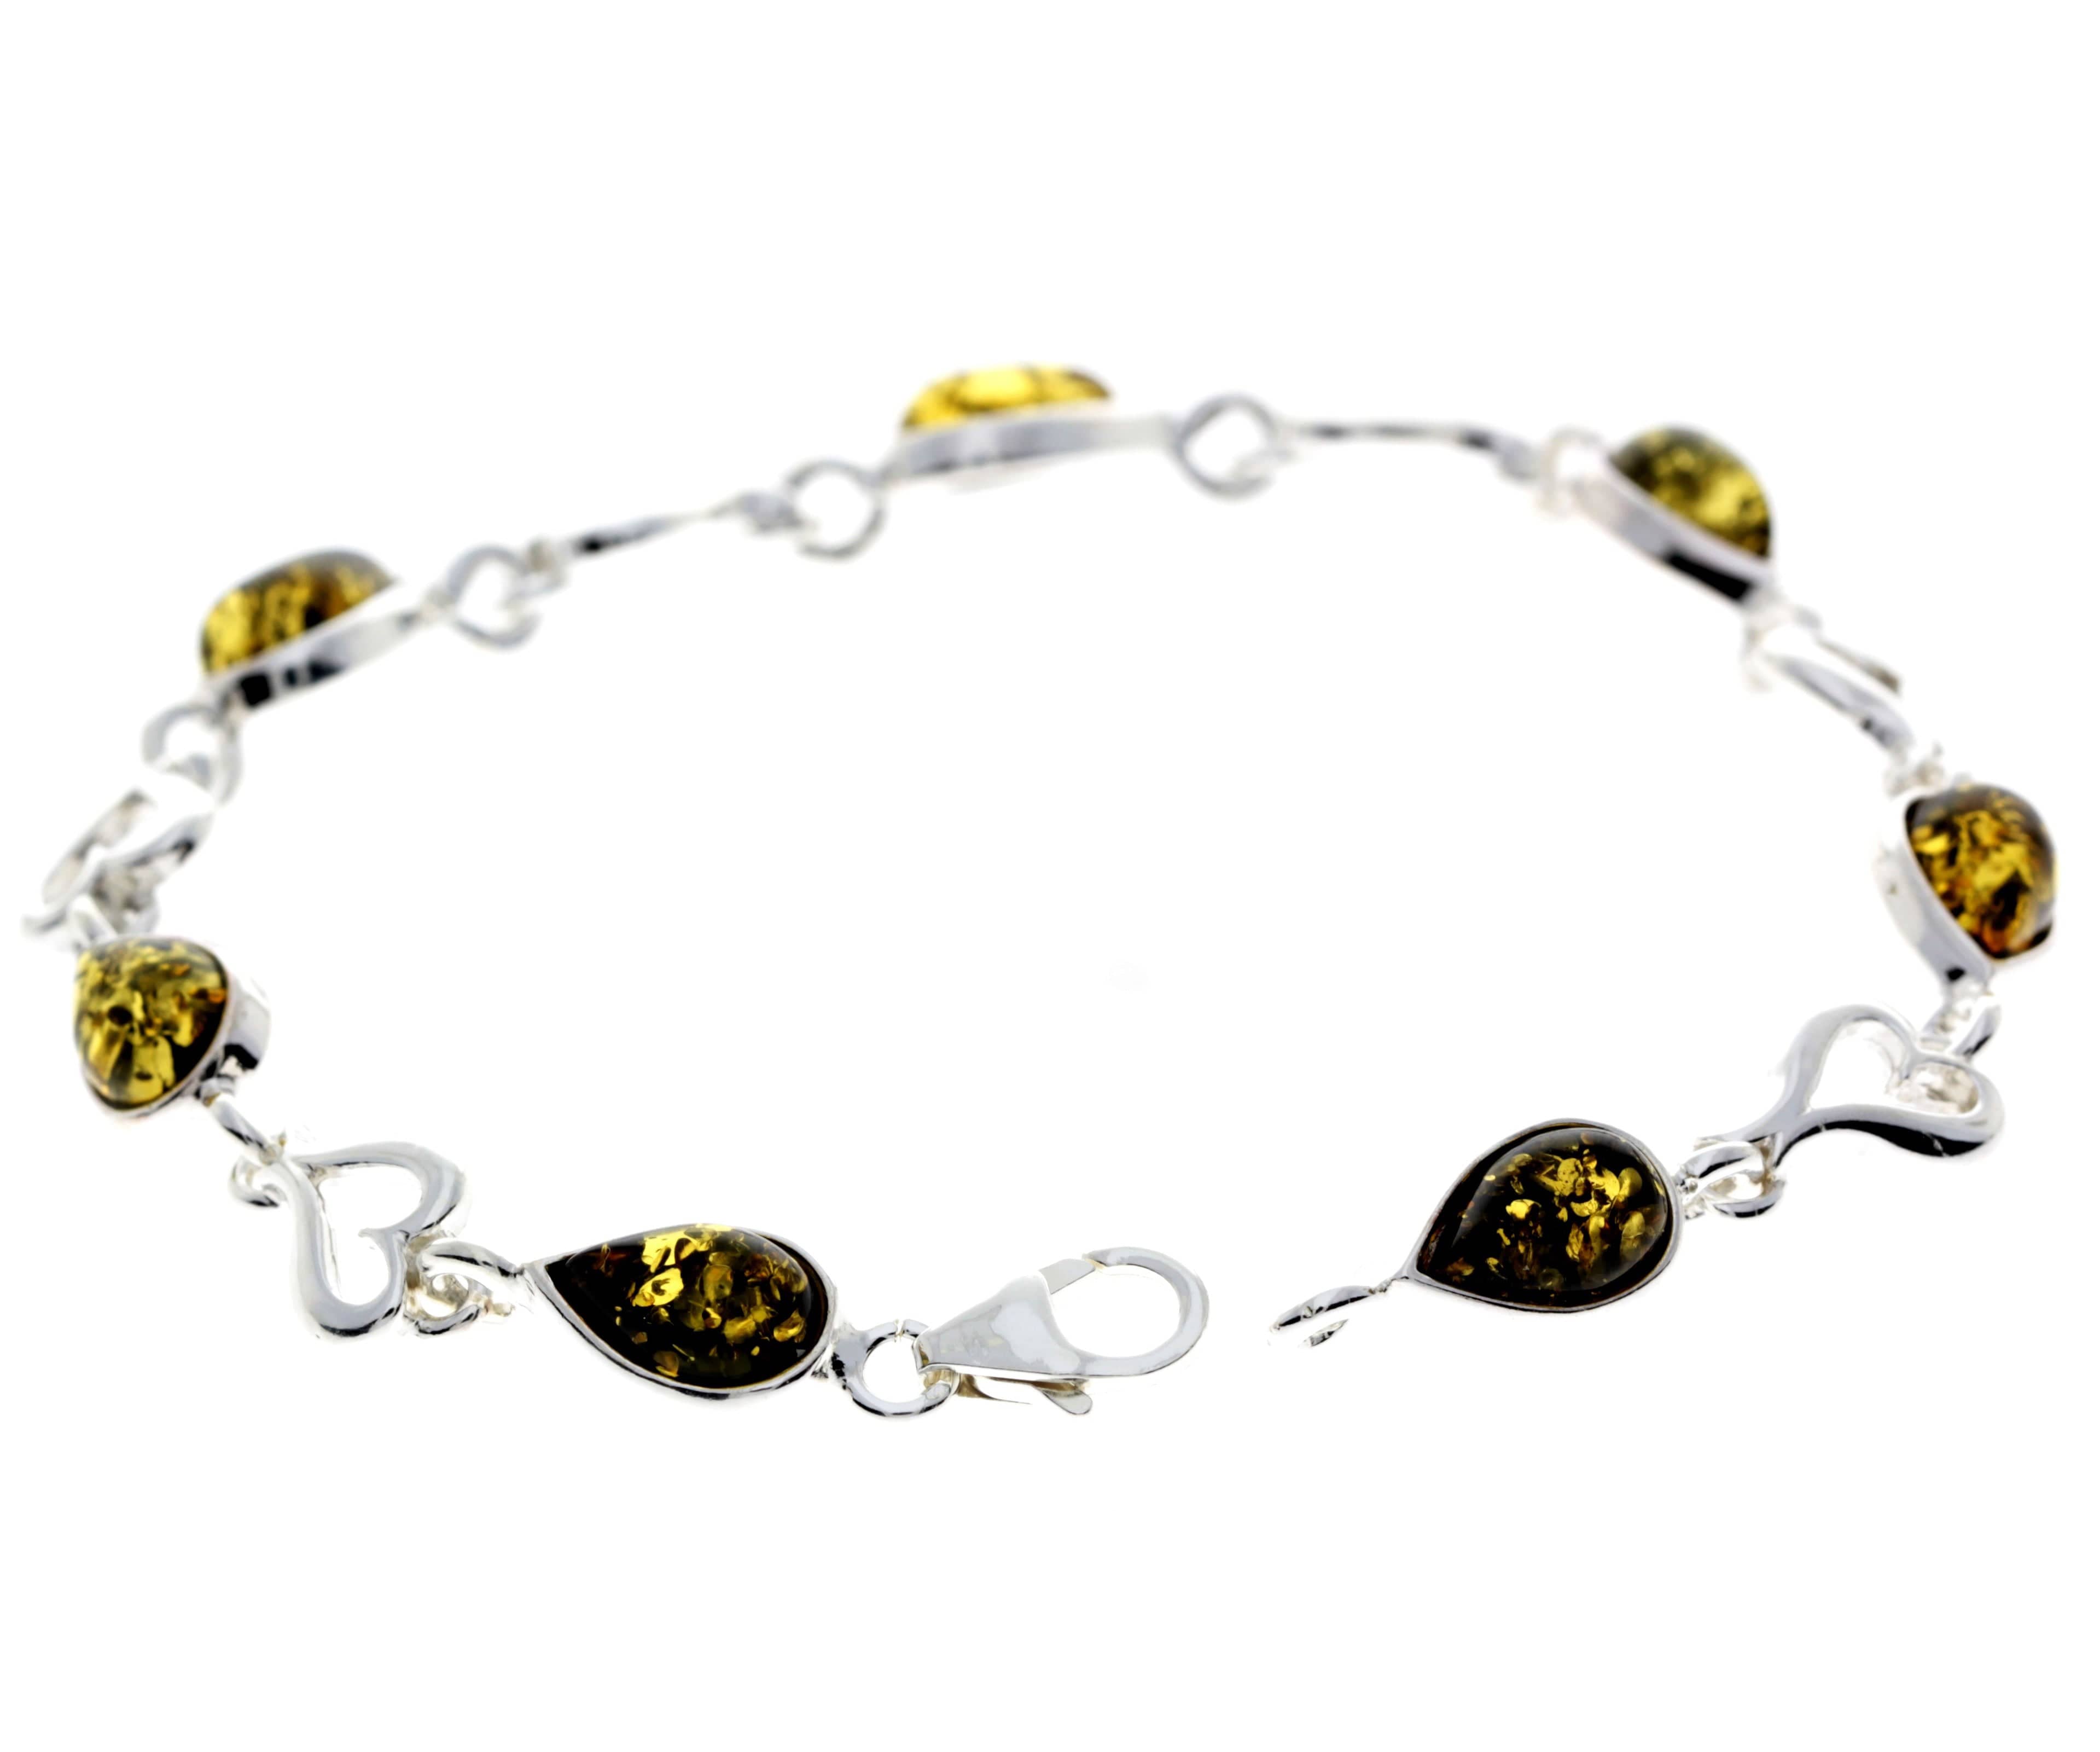 925 Sterling Silver & Genuine Baltic Amber Classic Link Hearts Bracelet - M519